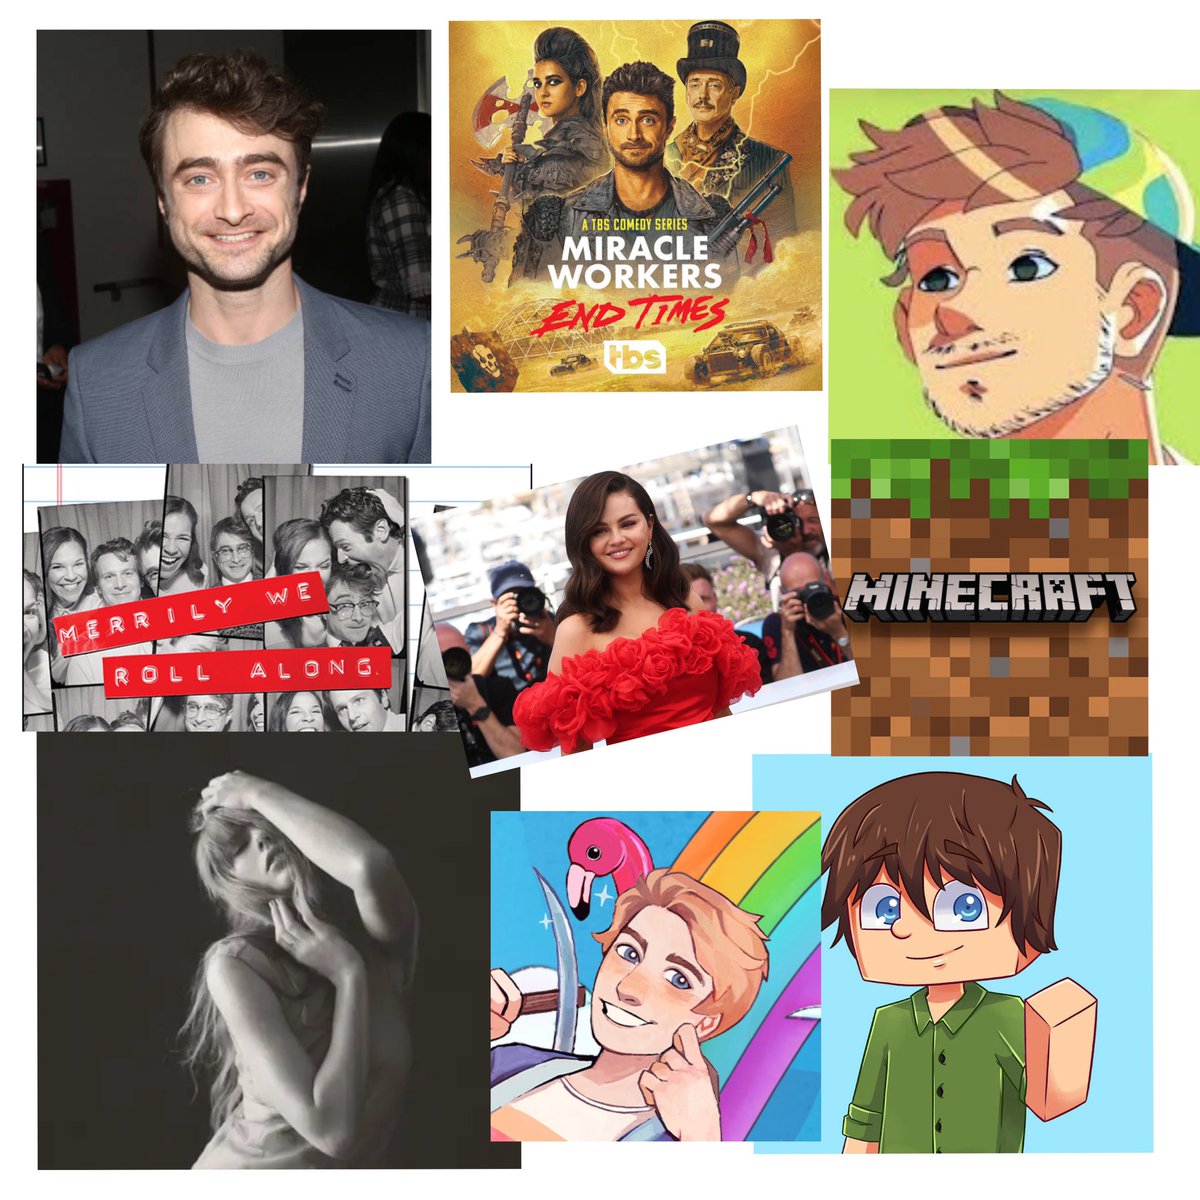 Part 1. If you are a fan of any of these things, then we should be moots!! 

🥰💜🥰💜

#DanielRadcliffe #MiracleWorkers #MerrilyWeRollAlong #JoeyGraceffa #JoeyGraceffaGames #MINECRAFT #Tubbo #Smajor1995 #DangThatsAlongName  #SelenaGomez #TaylorSwift